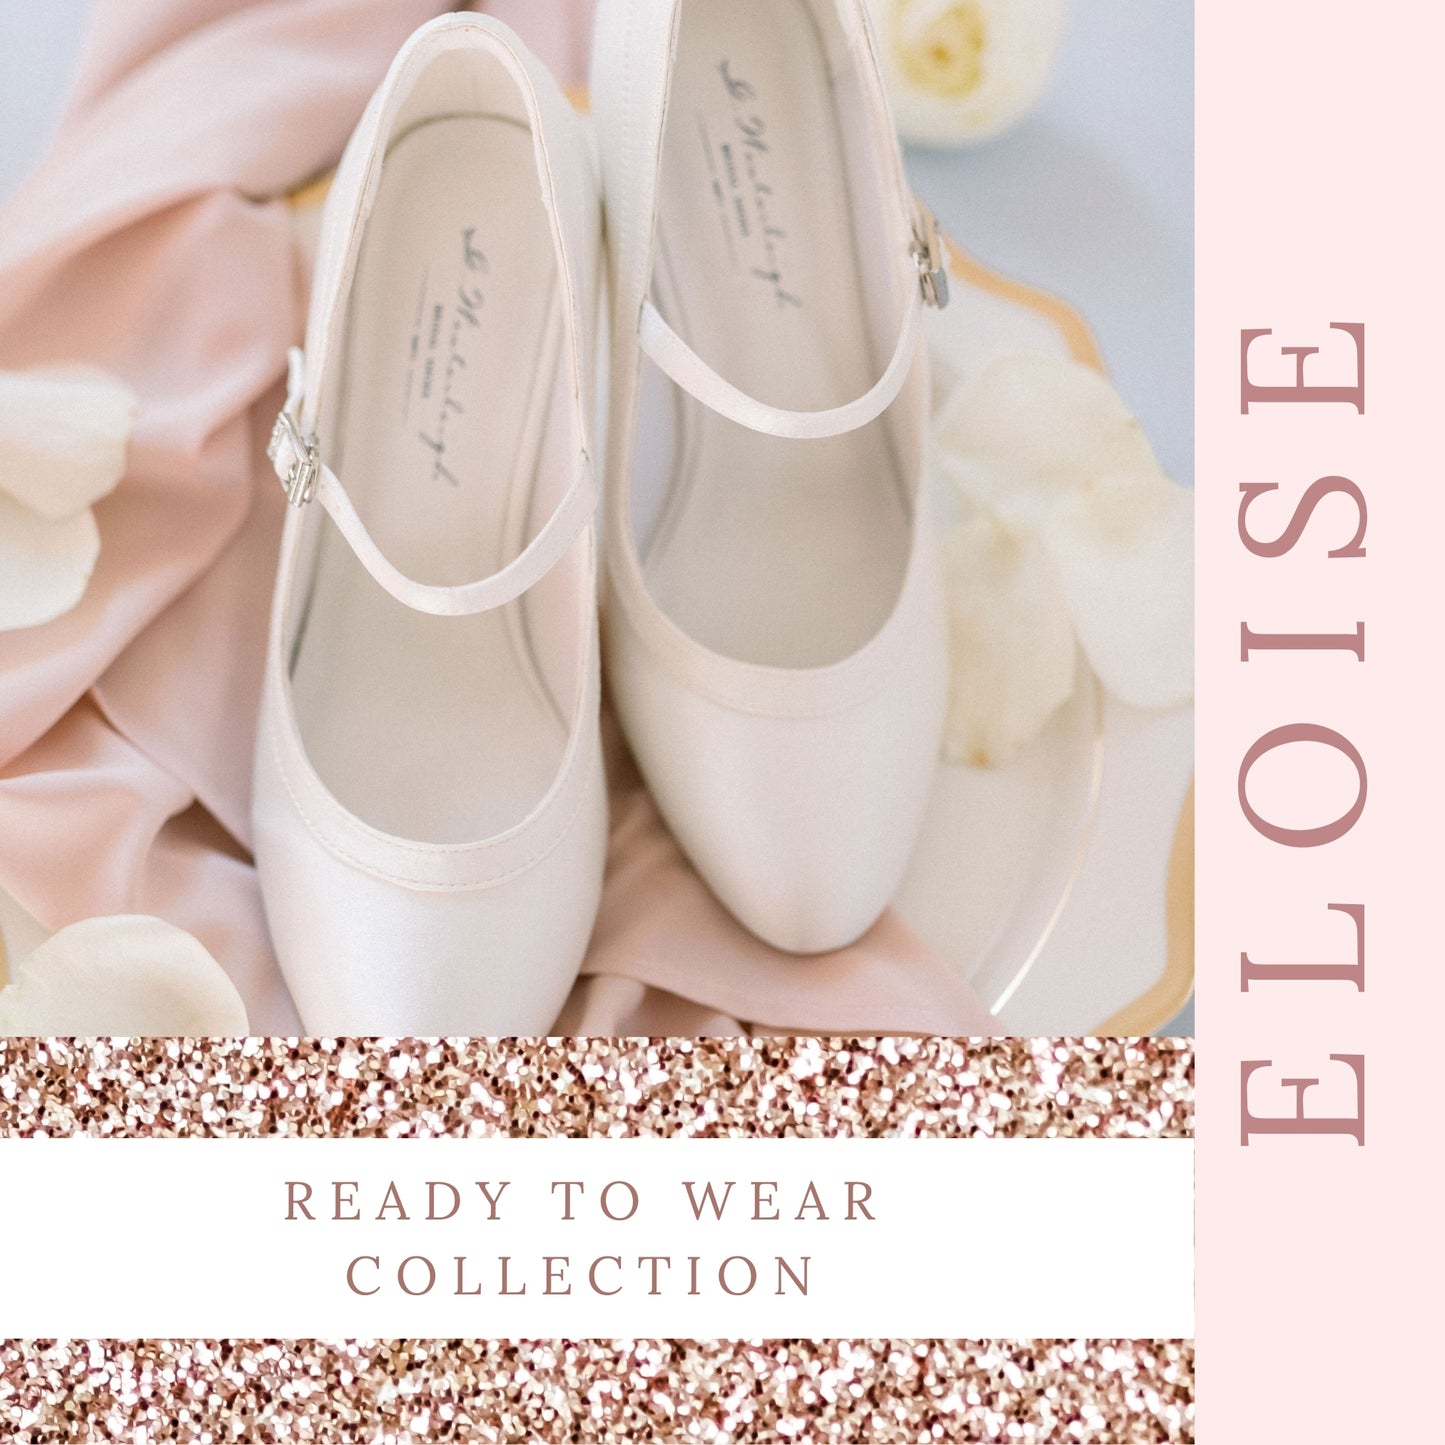 fifties-style-wedding-shoes